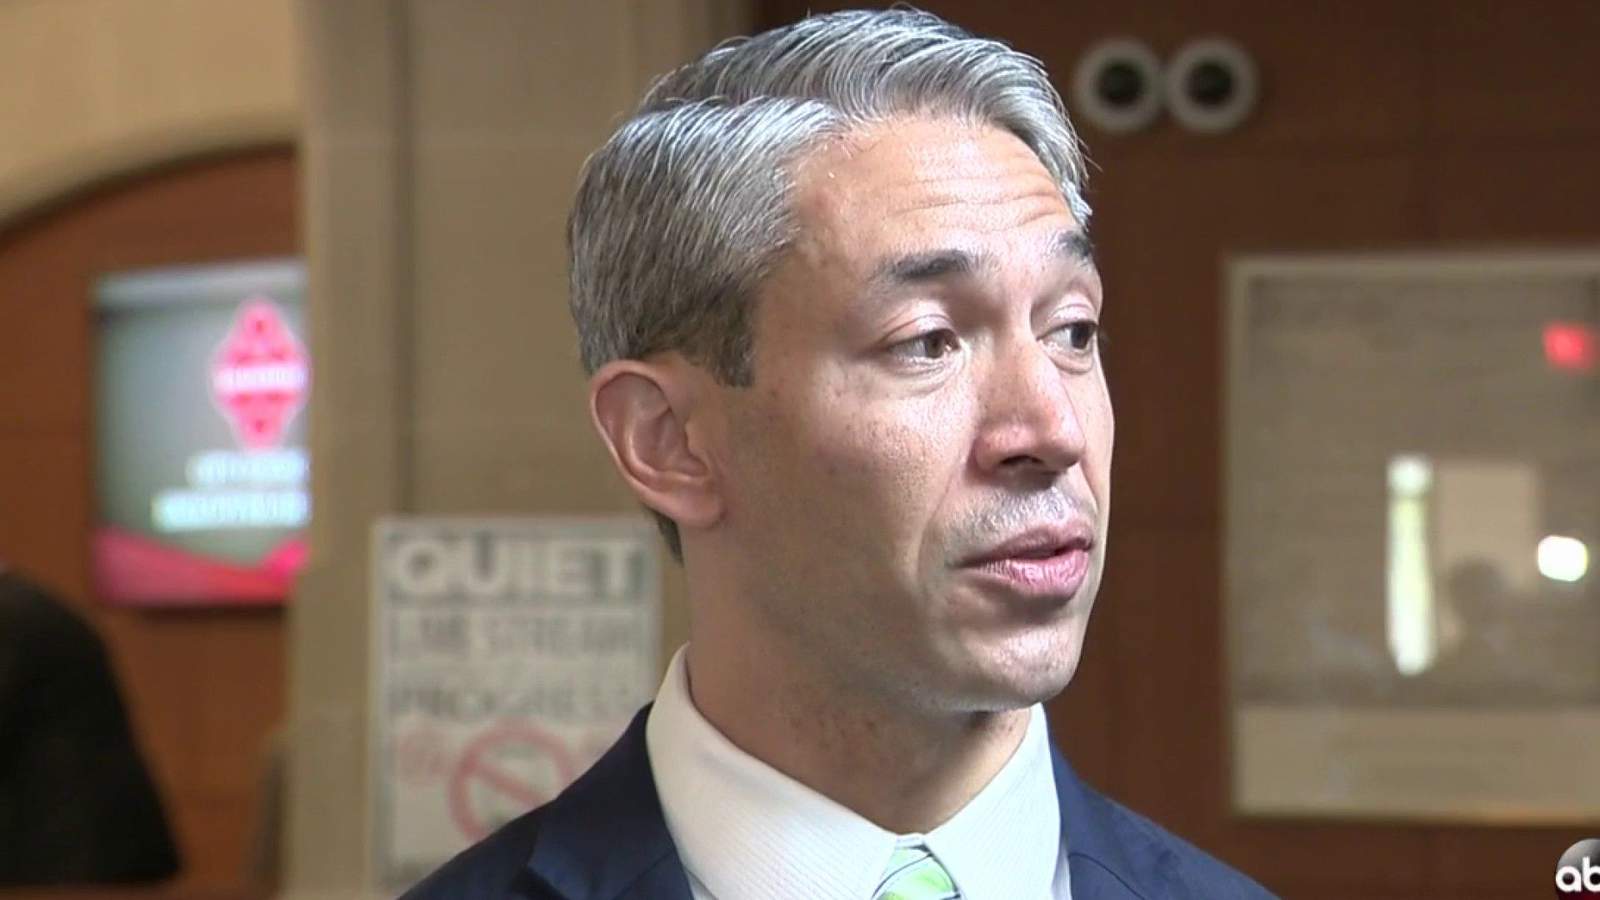 The protest... is over. This is something different: Mayor Nirenberg on San Antonio protest